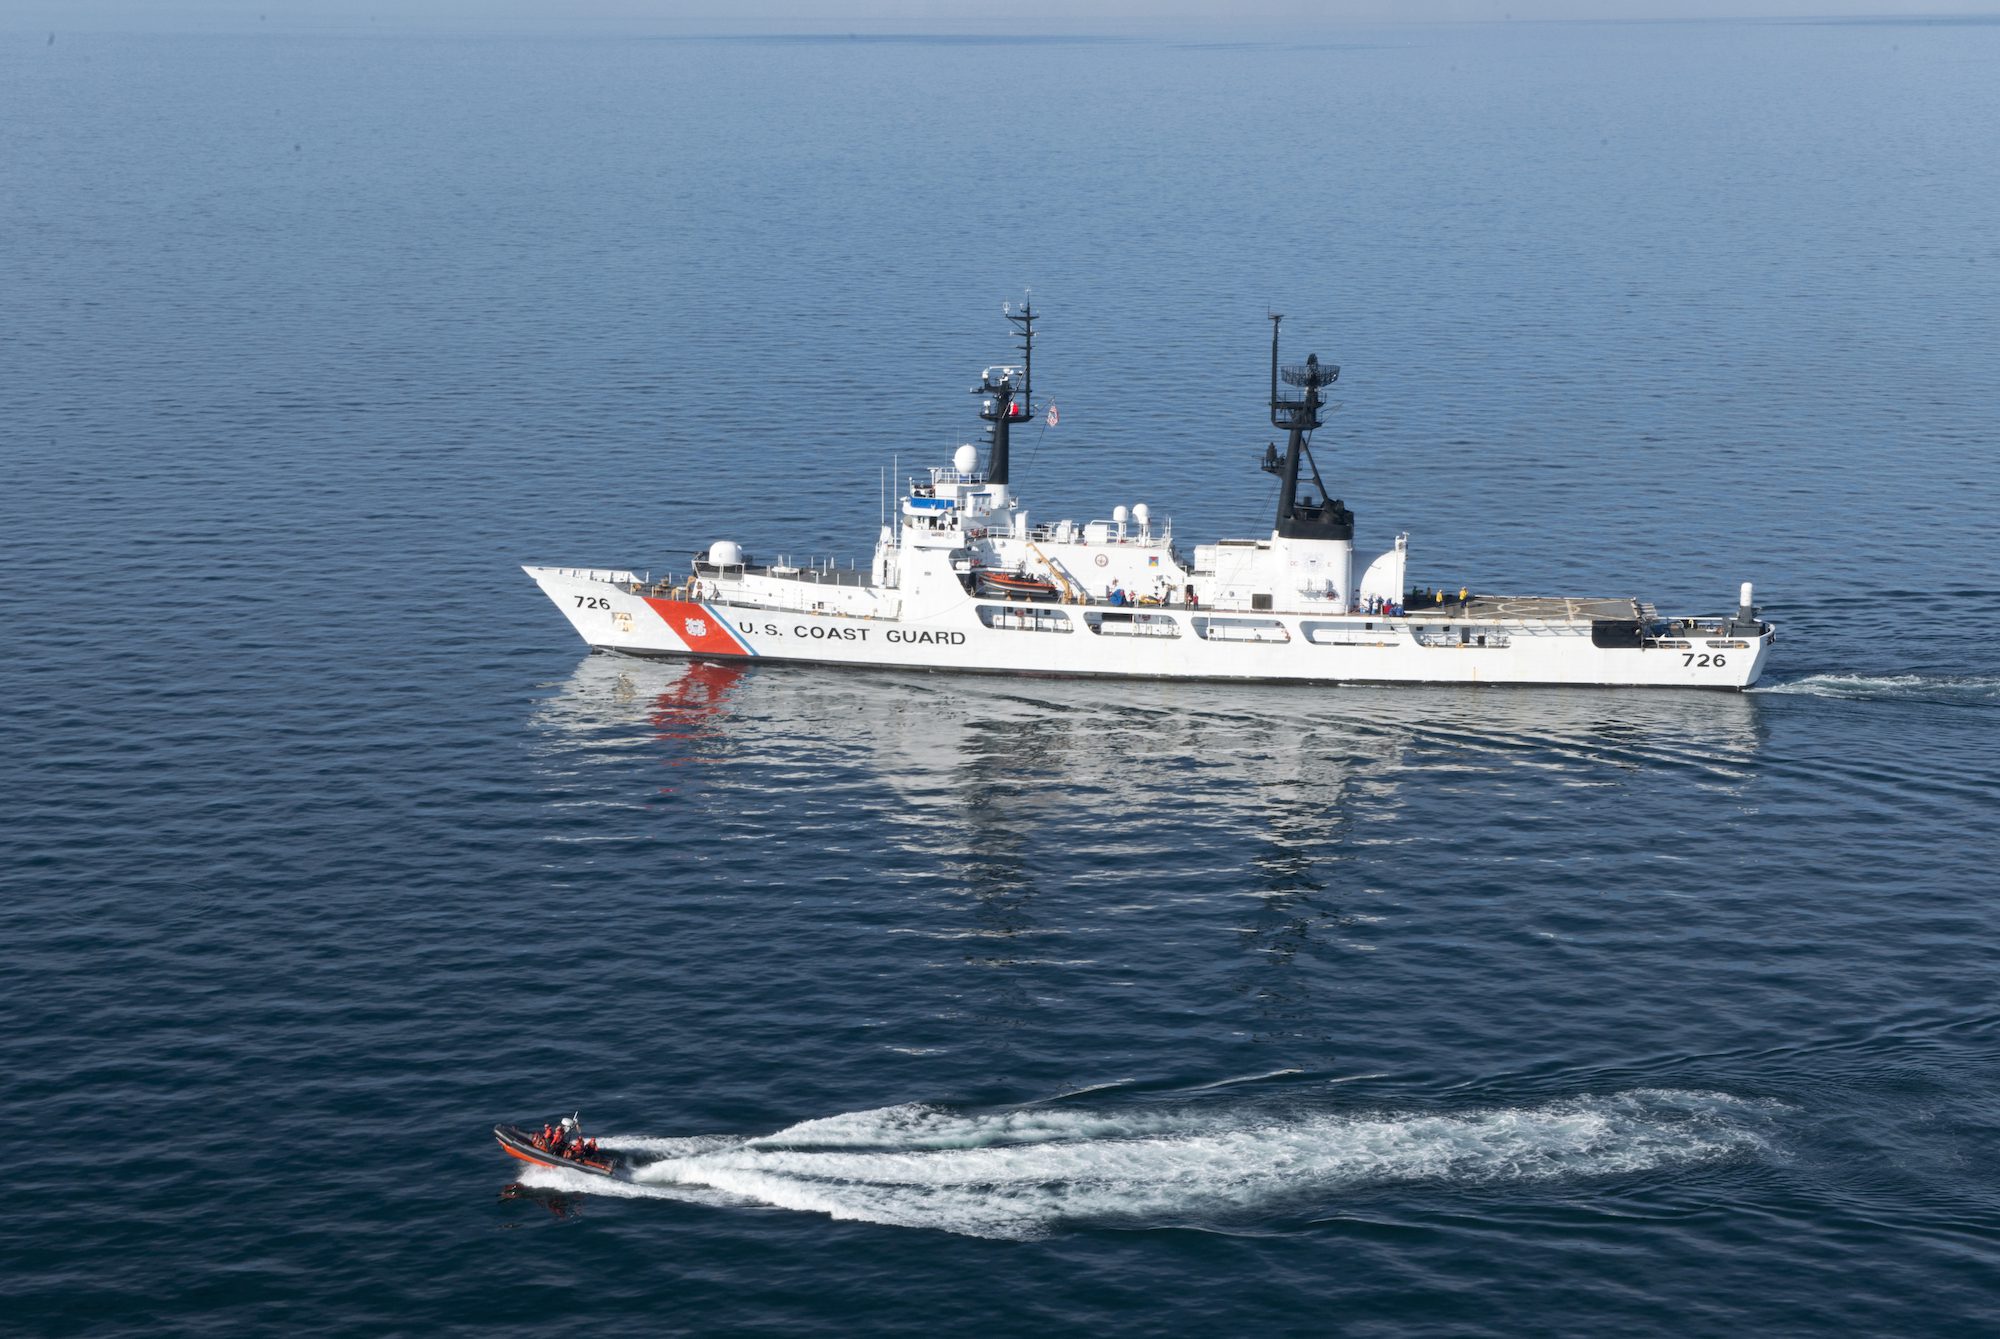 The Coast Guard Cutter Midgett, a 378-foot high-endurance cutter homeported in Seattle, transits the Strait of Juan de Fuca enroute to Seattle, Oct. 13, 2015.